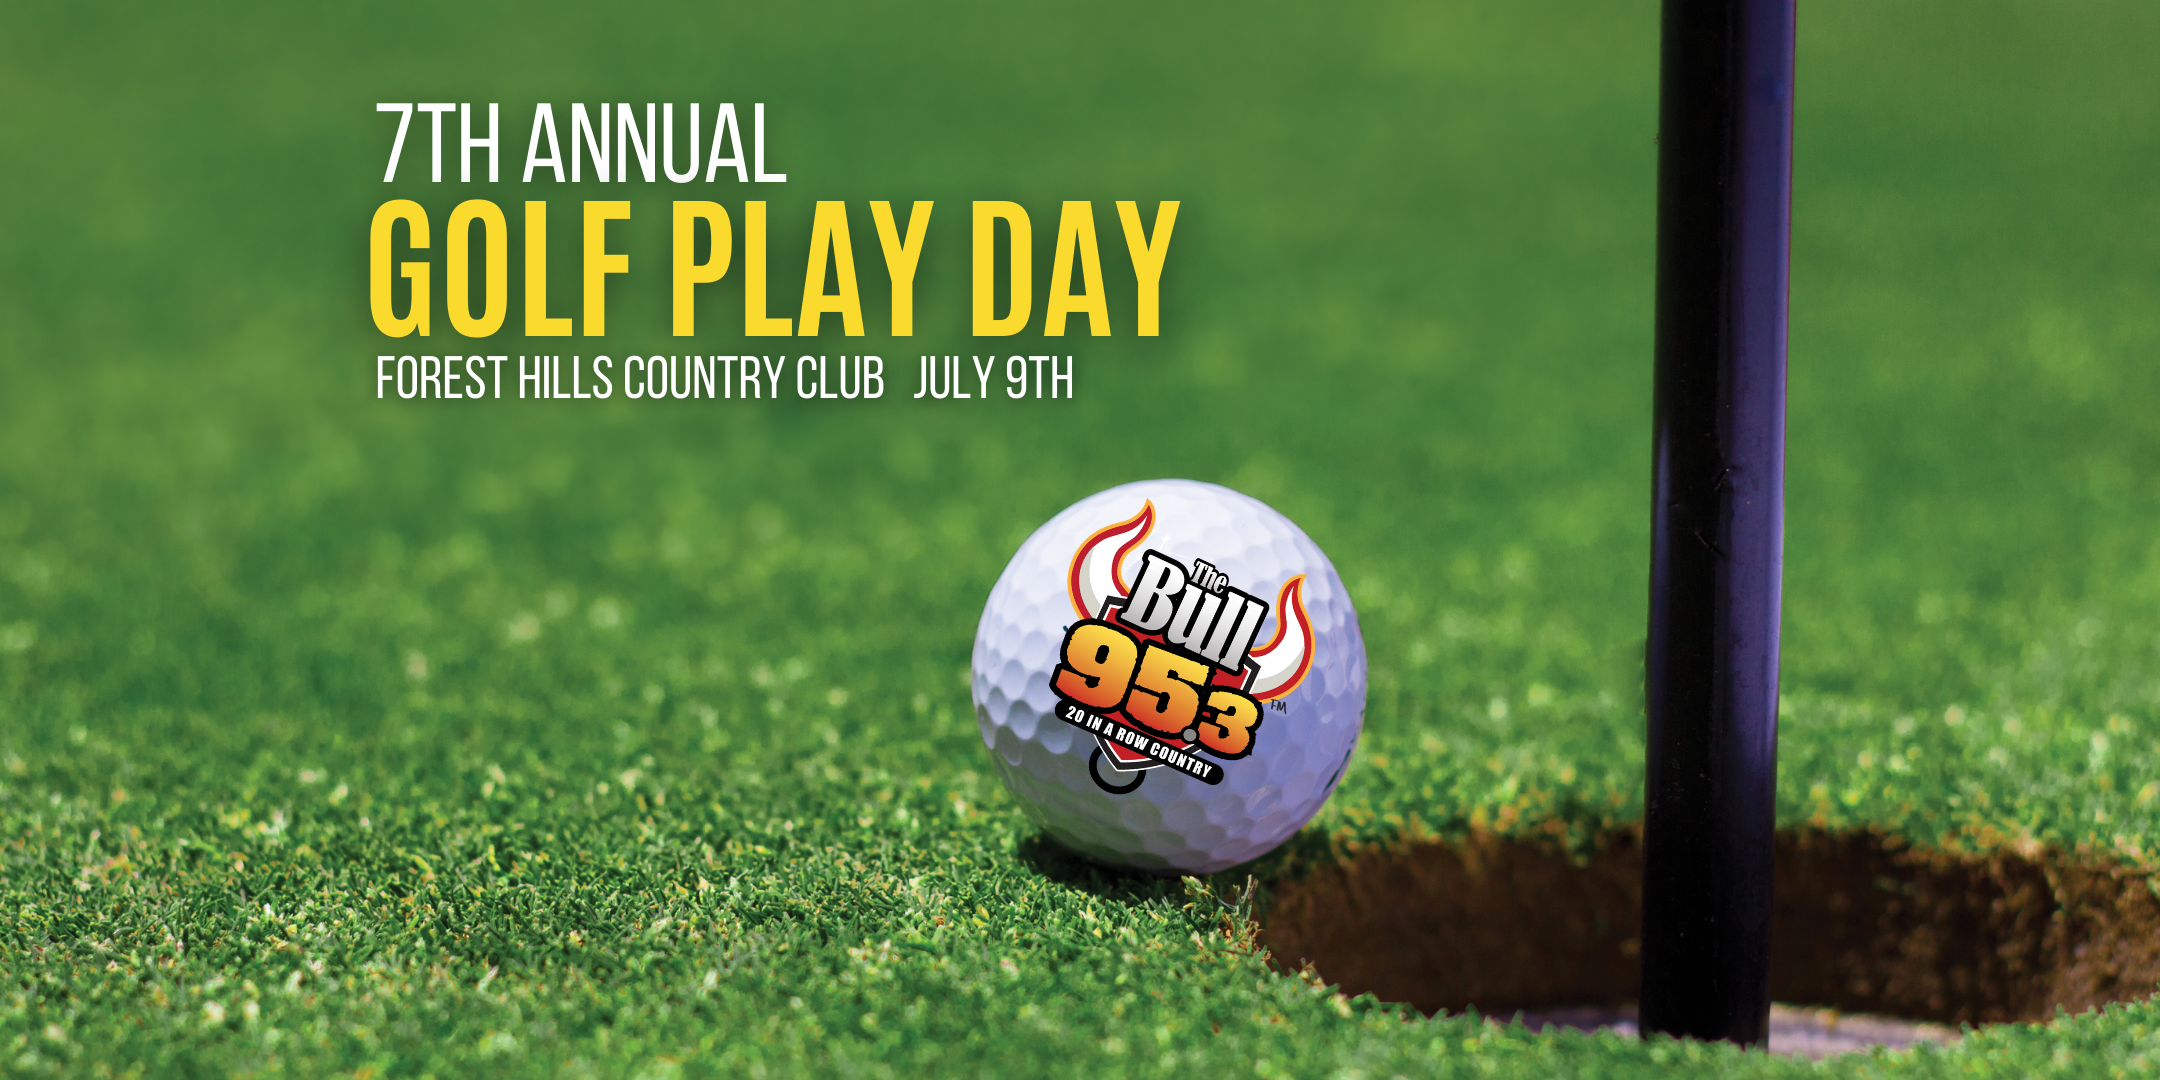 95.3 The Bull Golf Play Day